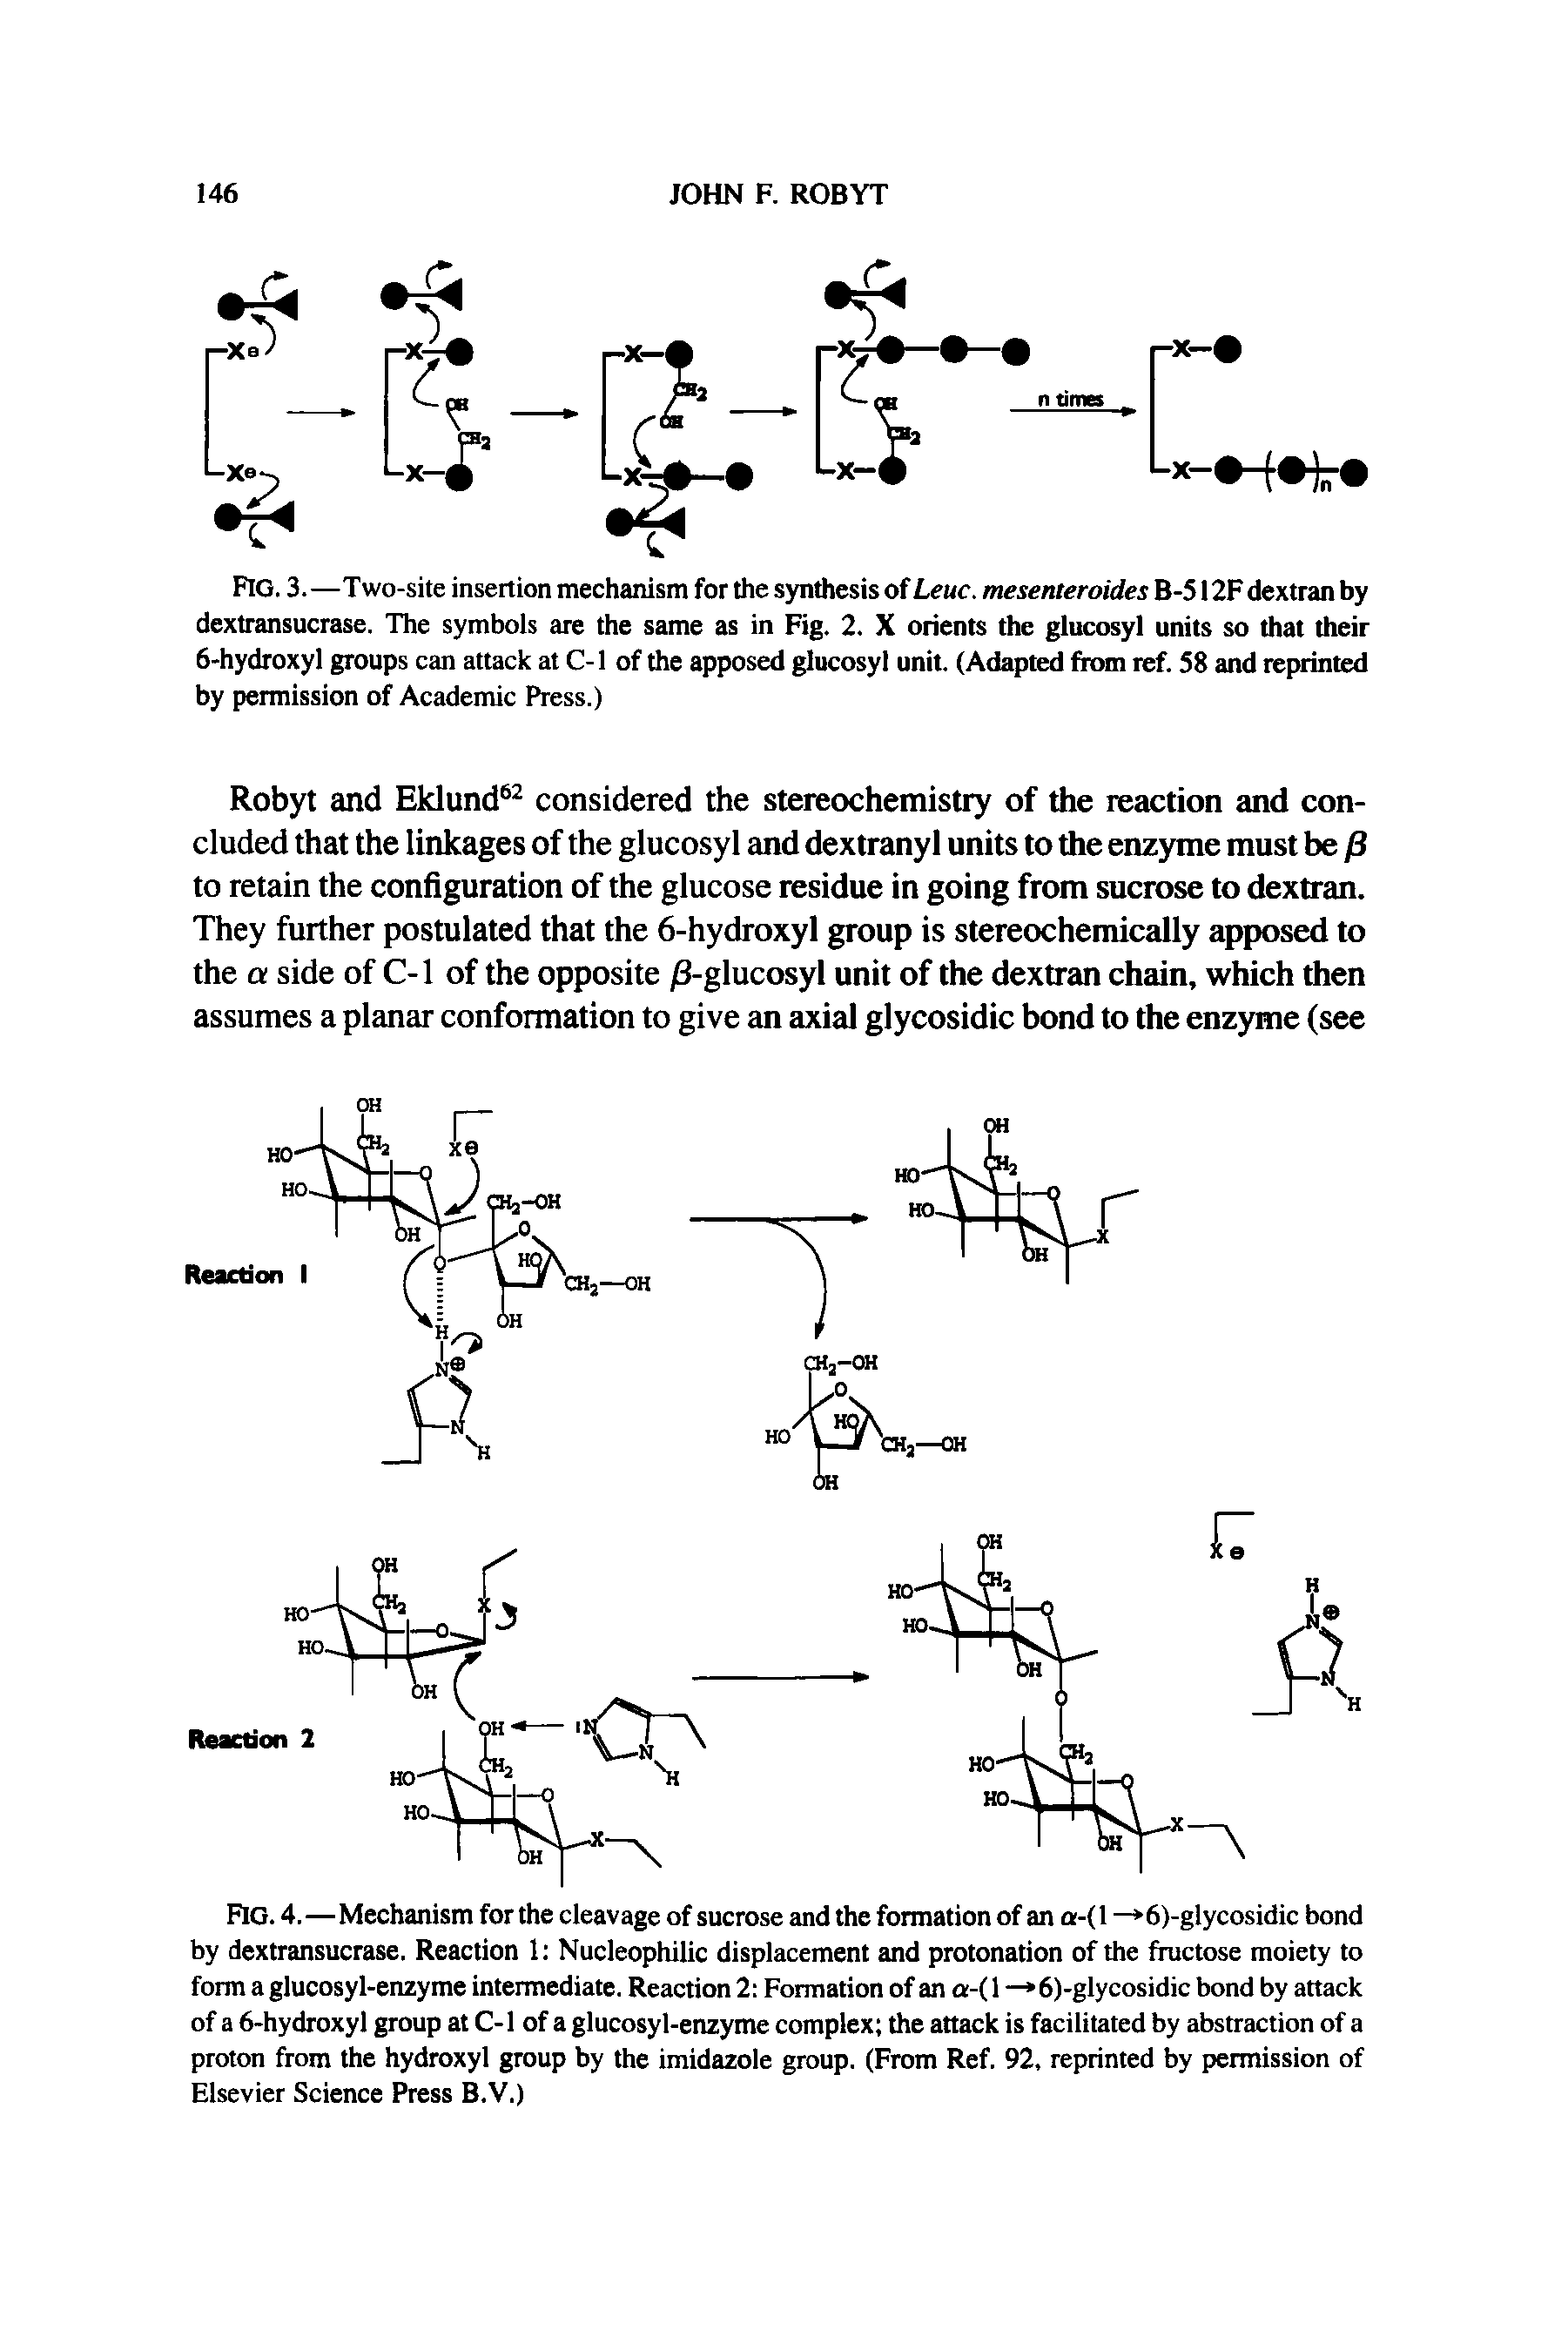 Fig. 4.—Mechanism for the cleavage of sucrose and the formation of an a-(l — 6)-glycosidic bond by dextransucrase. Reaction 1 Nucleophilic displacement and protonation of the fructose moiety to form a glucosyl-enzyme intermediate. Reaction 2 Formation of an a-( 1 — 6)-glycosidic bond by attack of a 6-hydroxyl group at C-l of a glucosyl-enzyme complex the attack is facilitated by abstraction of a proton from the hydroxyl group by the imidazole group. (From Ref. 92, reprinted by permission of Elsevier Science Press B.V.)...